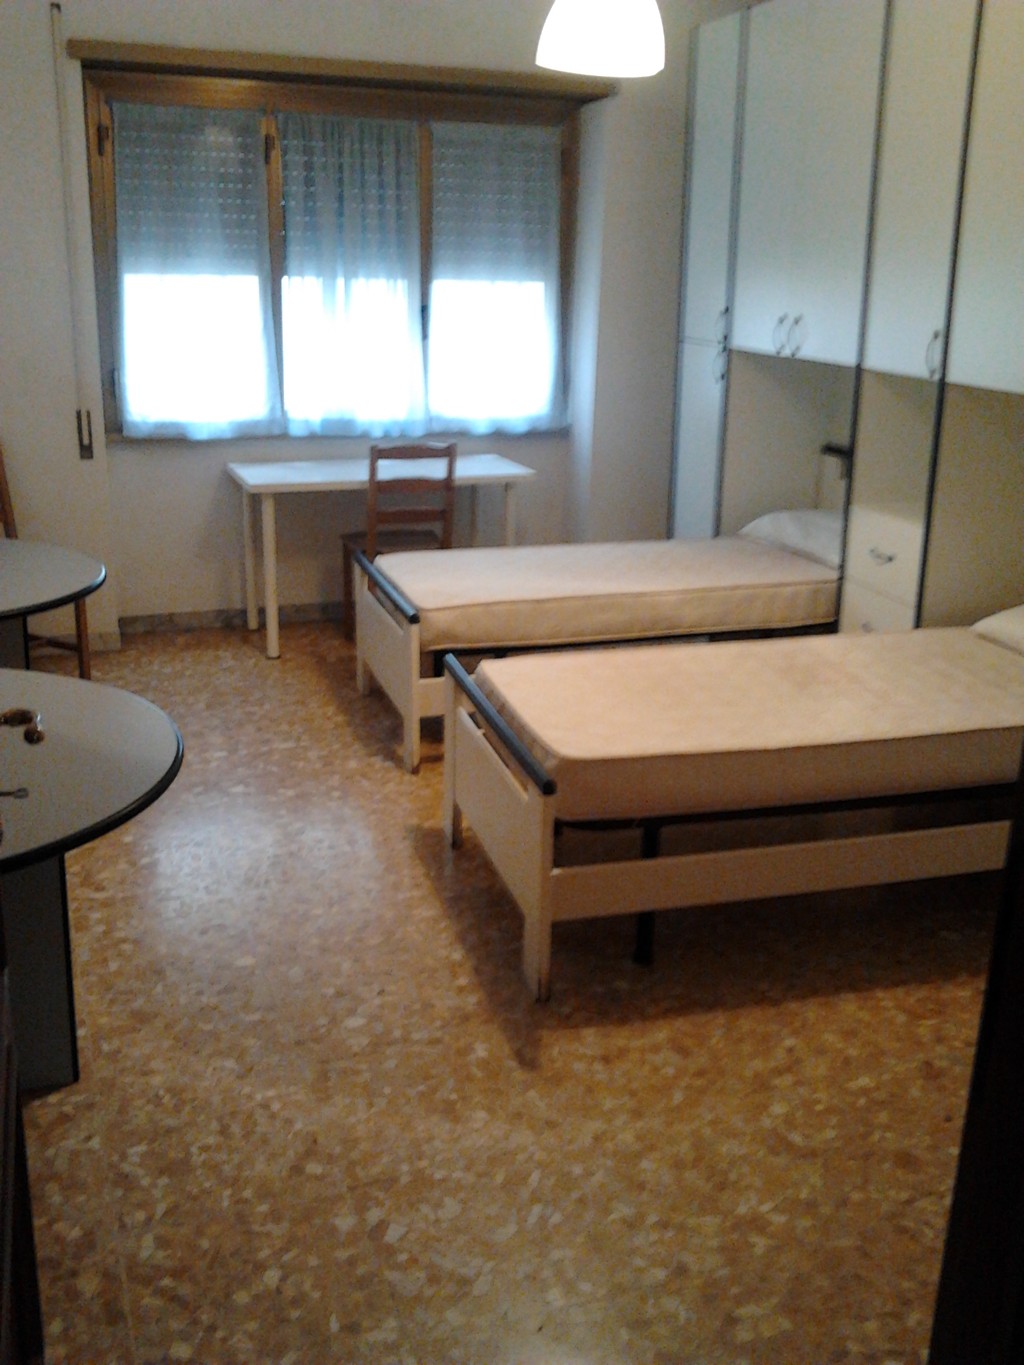 rent a room in rome italy